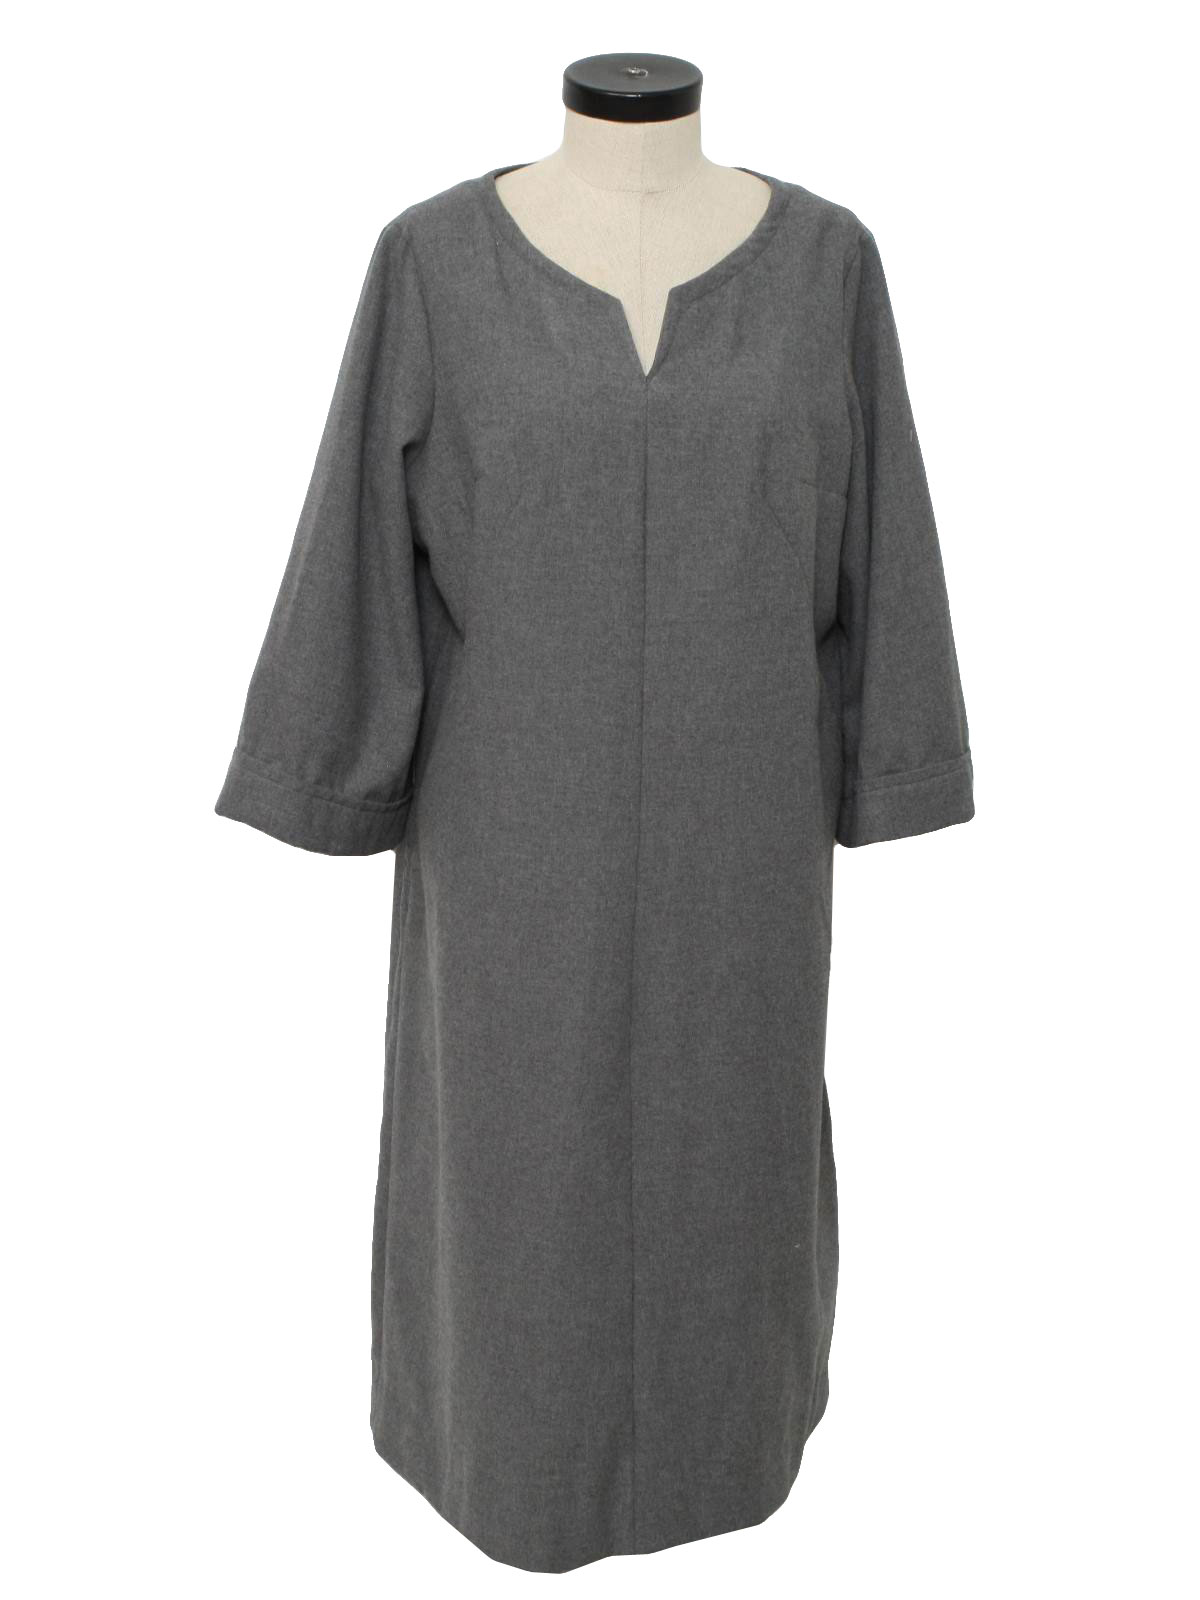 Seventies Home Sewn Dress: 70s -Home Sewn- Womens grey, blended wool ...